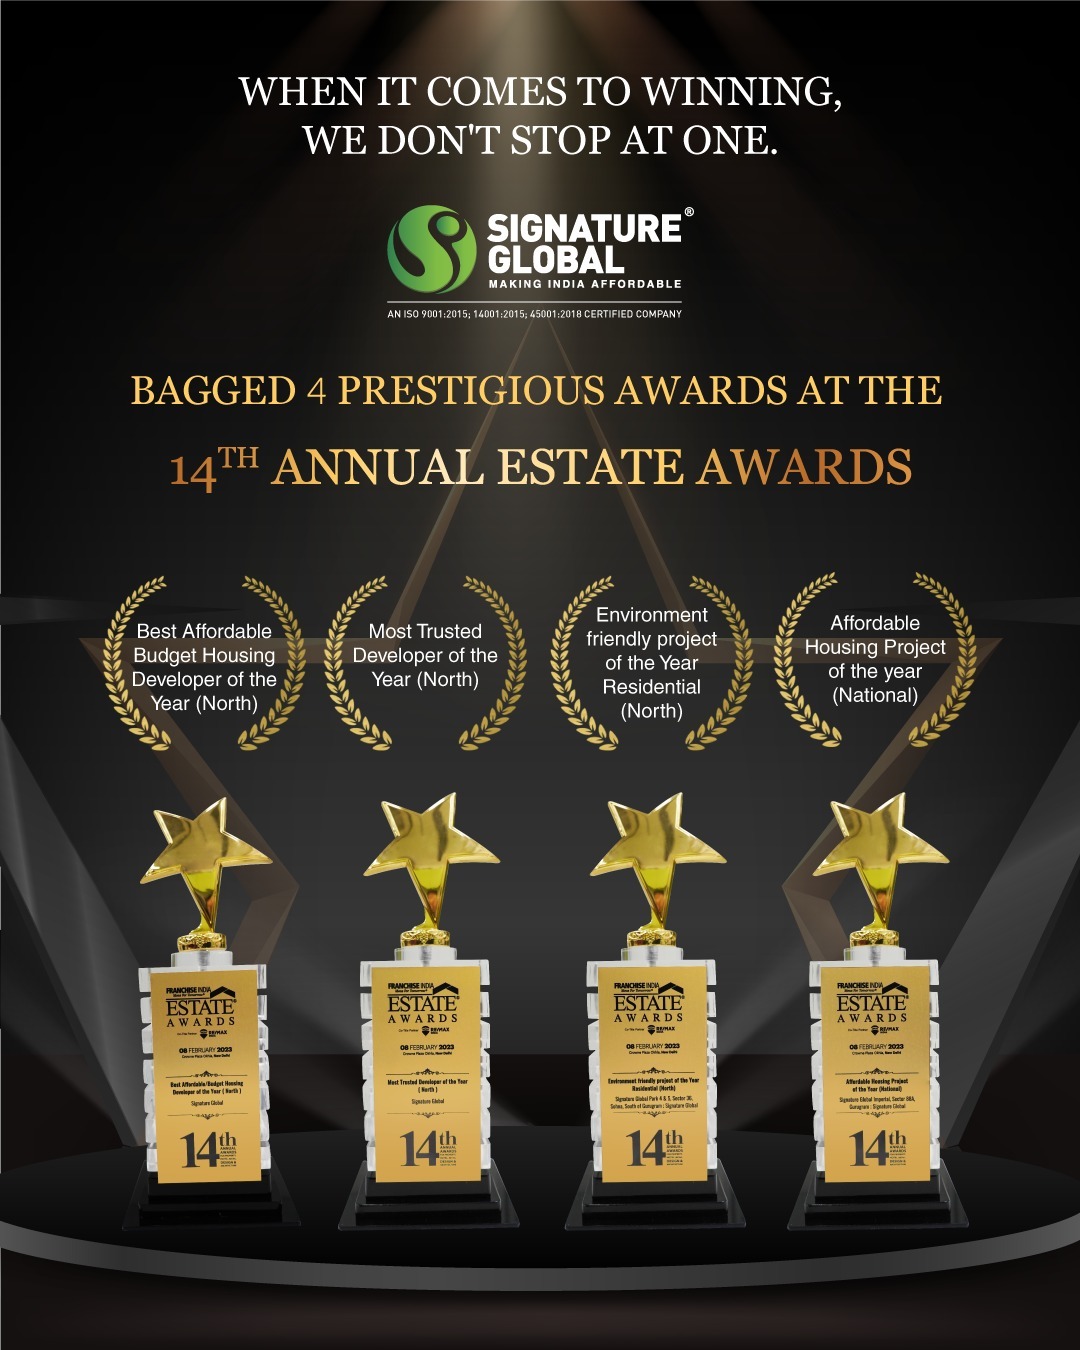 It is a moment of great joy for us to announce that Signature Global won 4 prestigious awards at the 14th Annual Estate Awards. Update